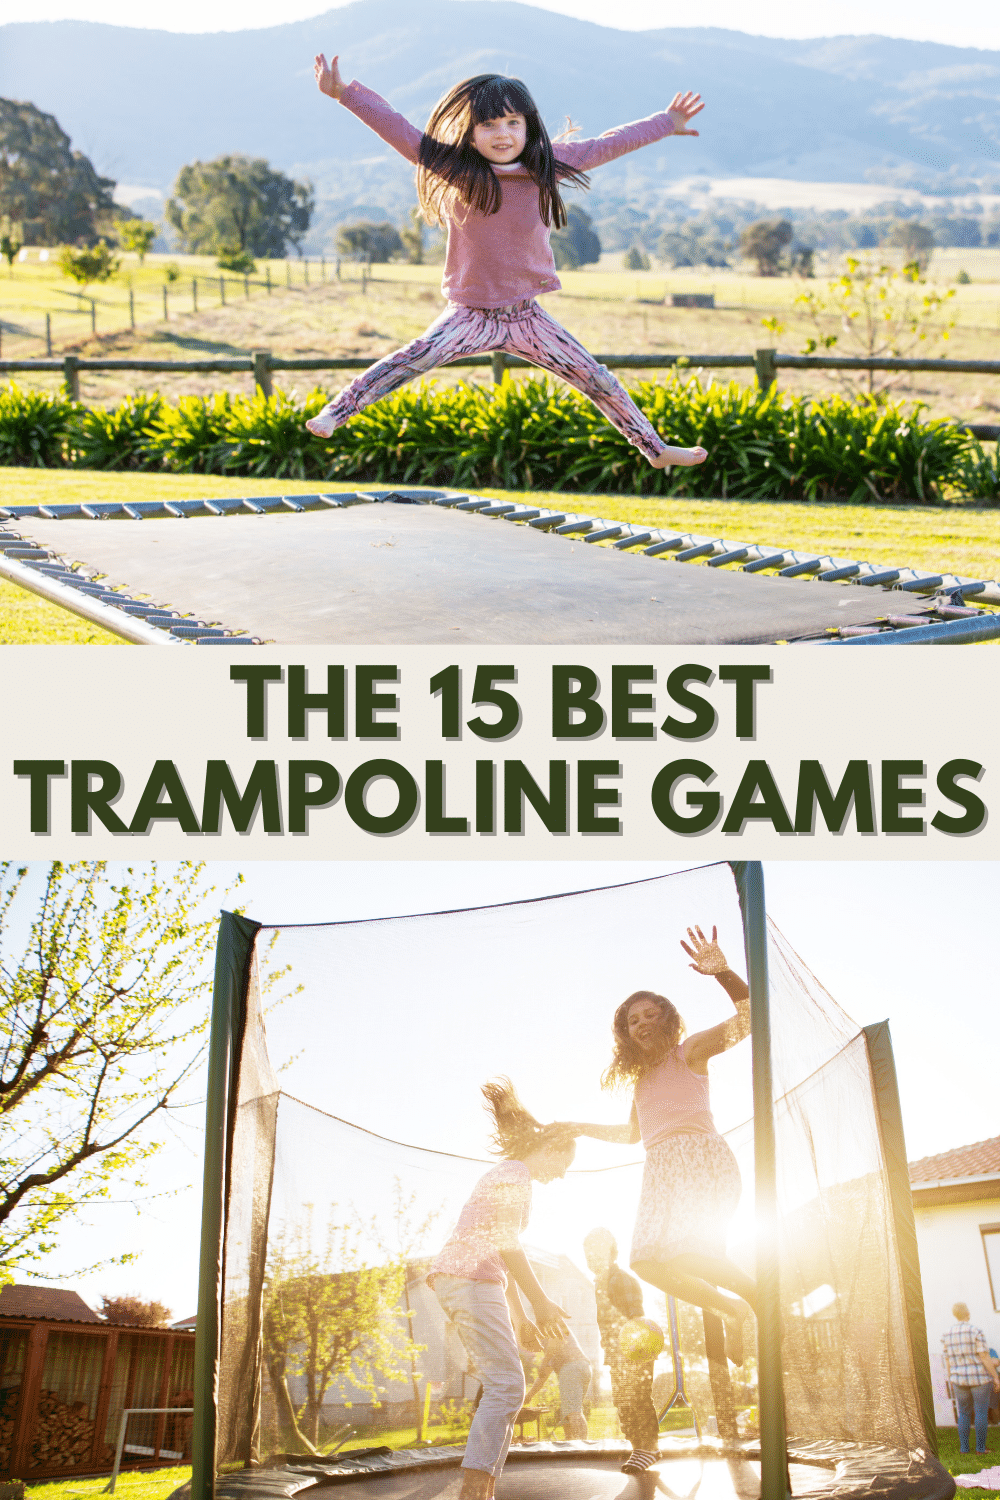 If you're looking for hours of bouncy fun, you're going to love this collection of the 15 best trampoline games you can play with your family. #trampoline #outdooractivities #familyfun via @wondermomwannab